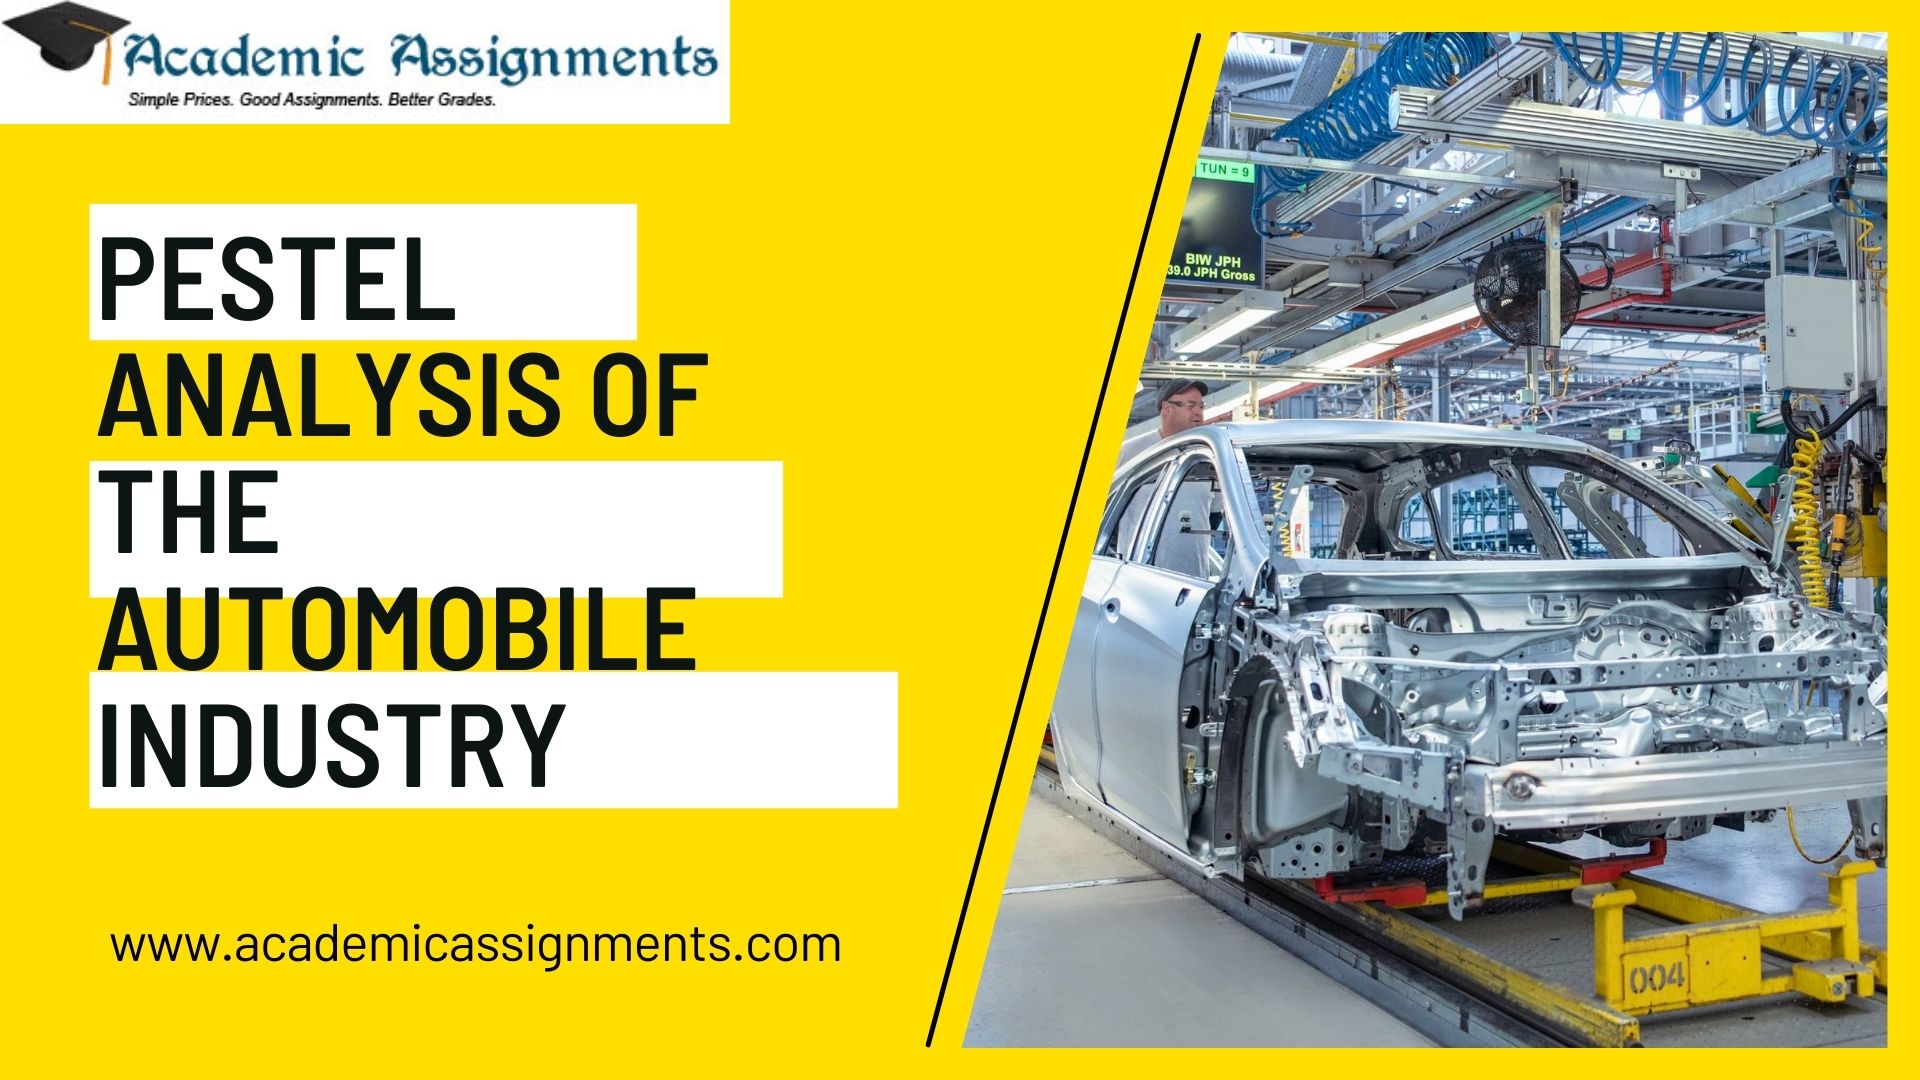 Pestel Analysis of the Automobile Industry